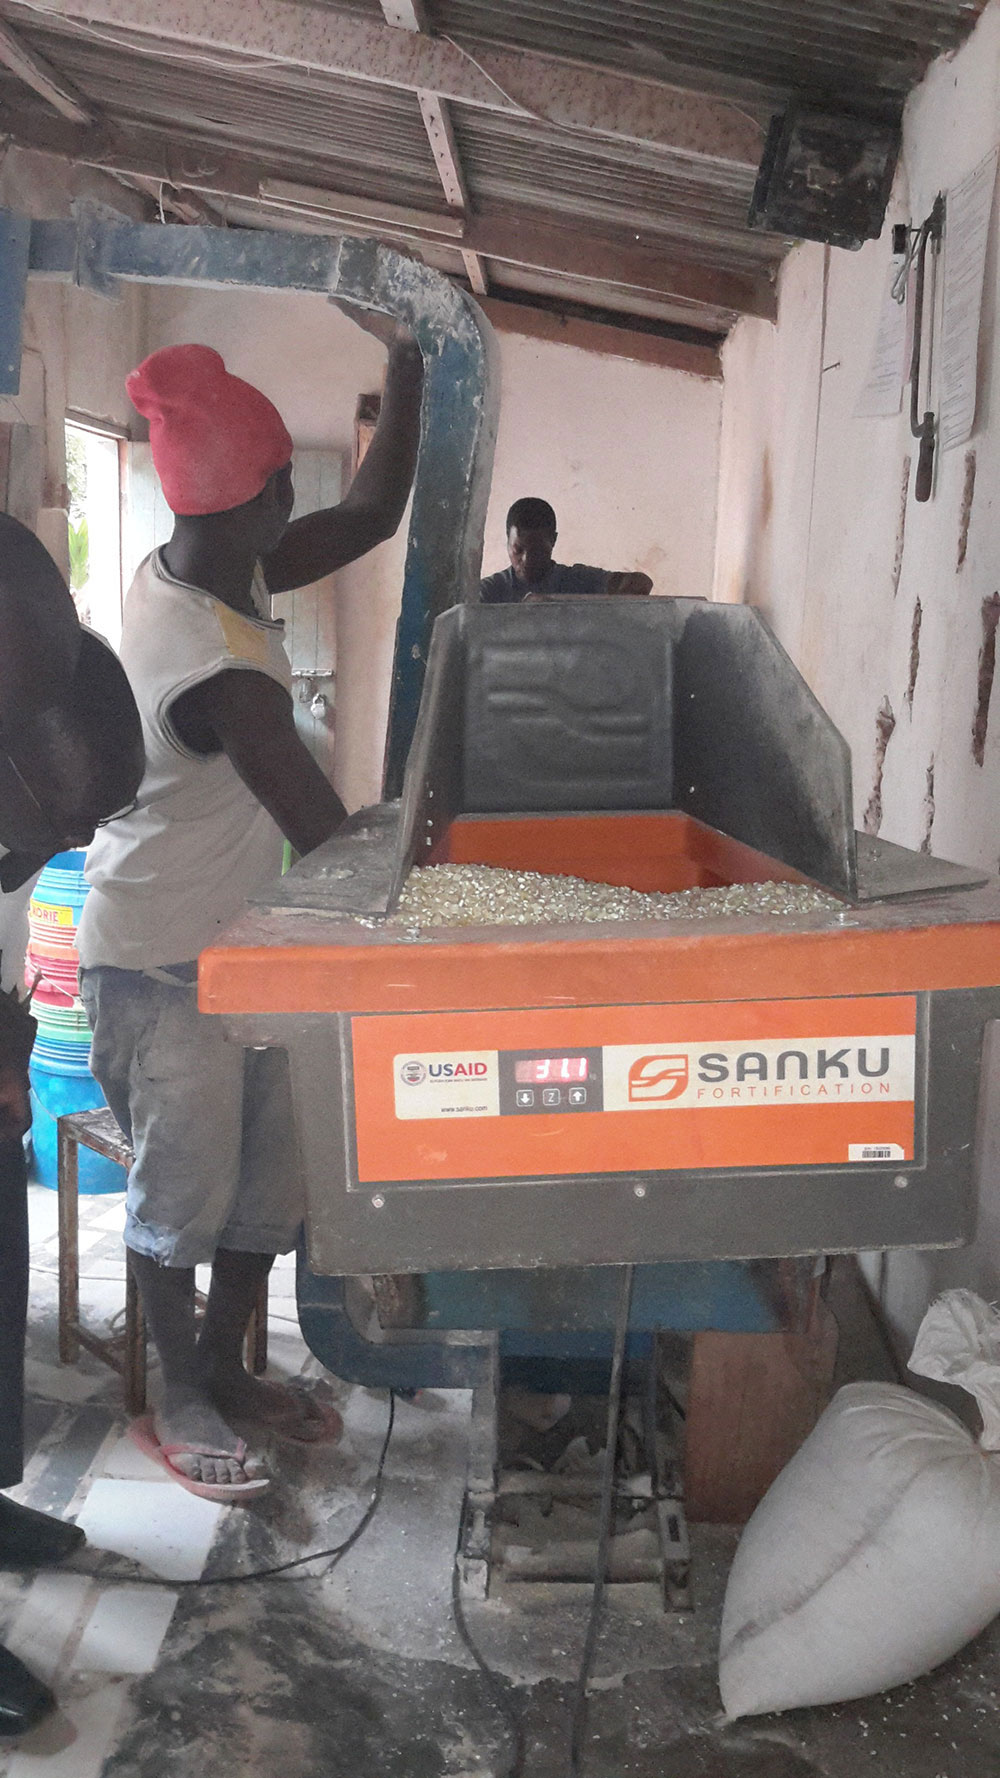 A miller at Family Choice Maize Millers uses a Sanku machine to fortify grain.